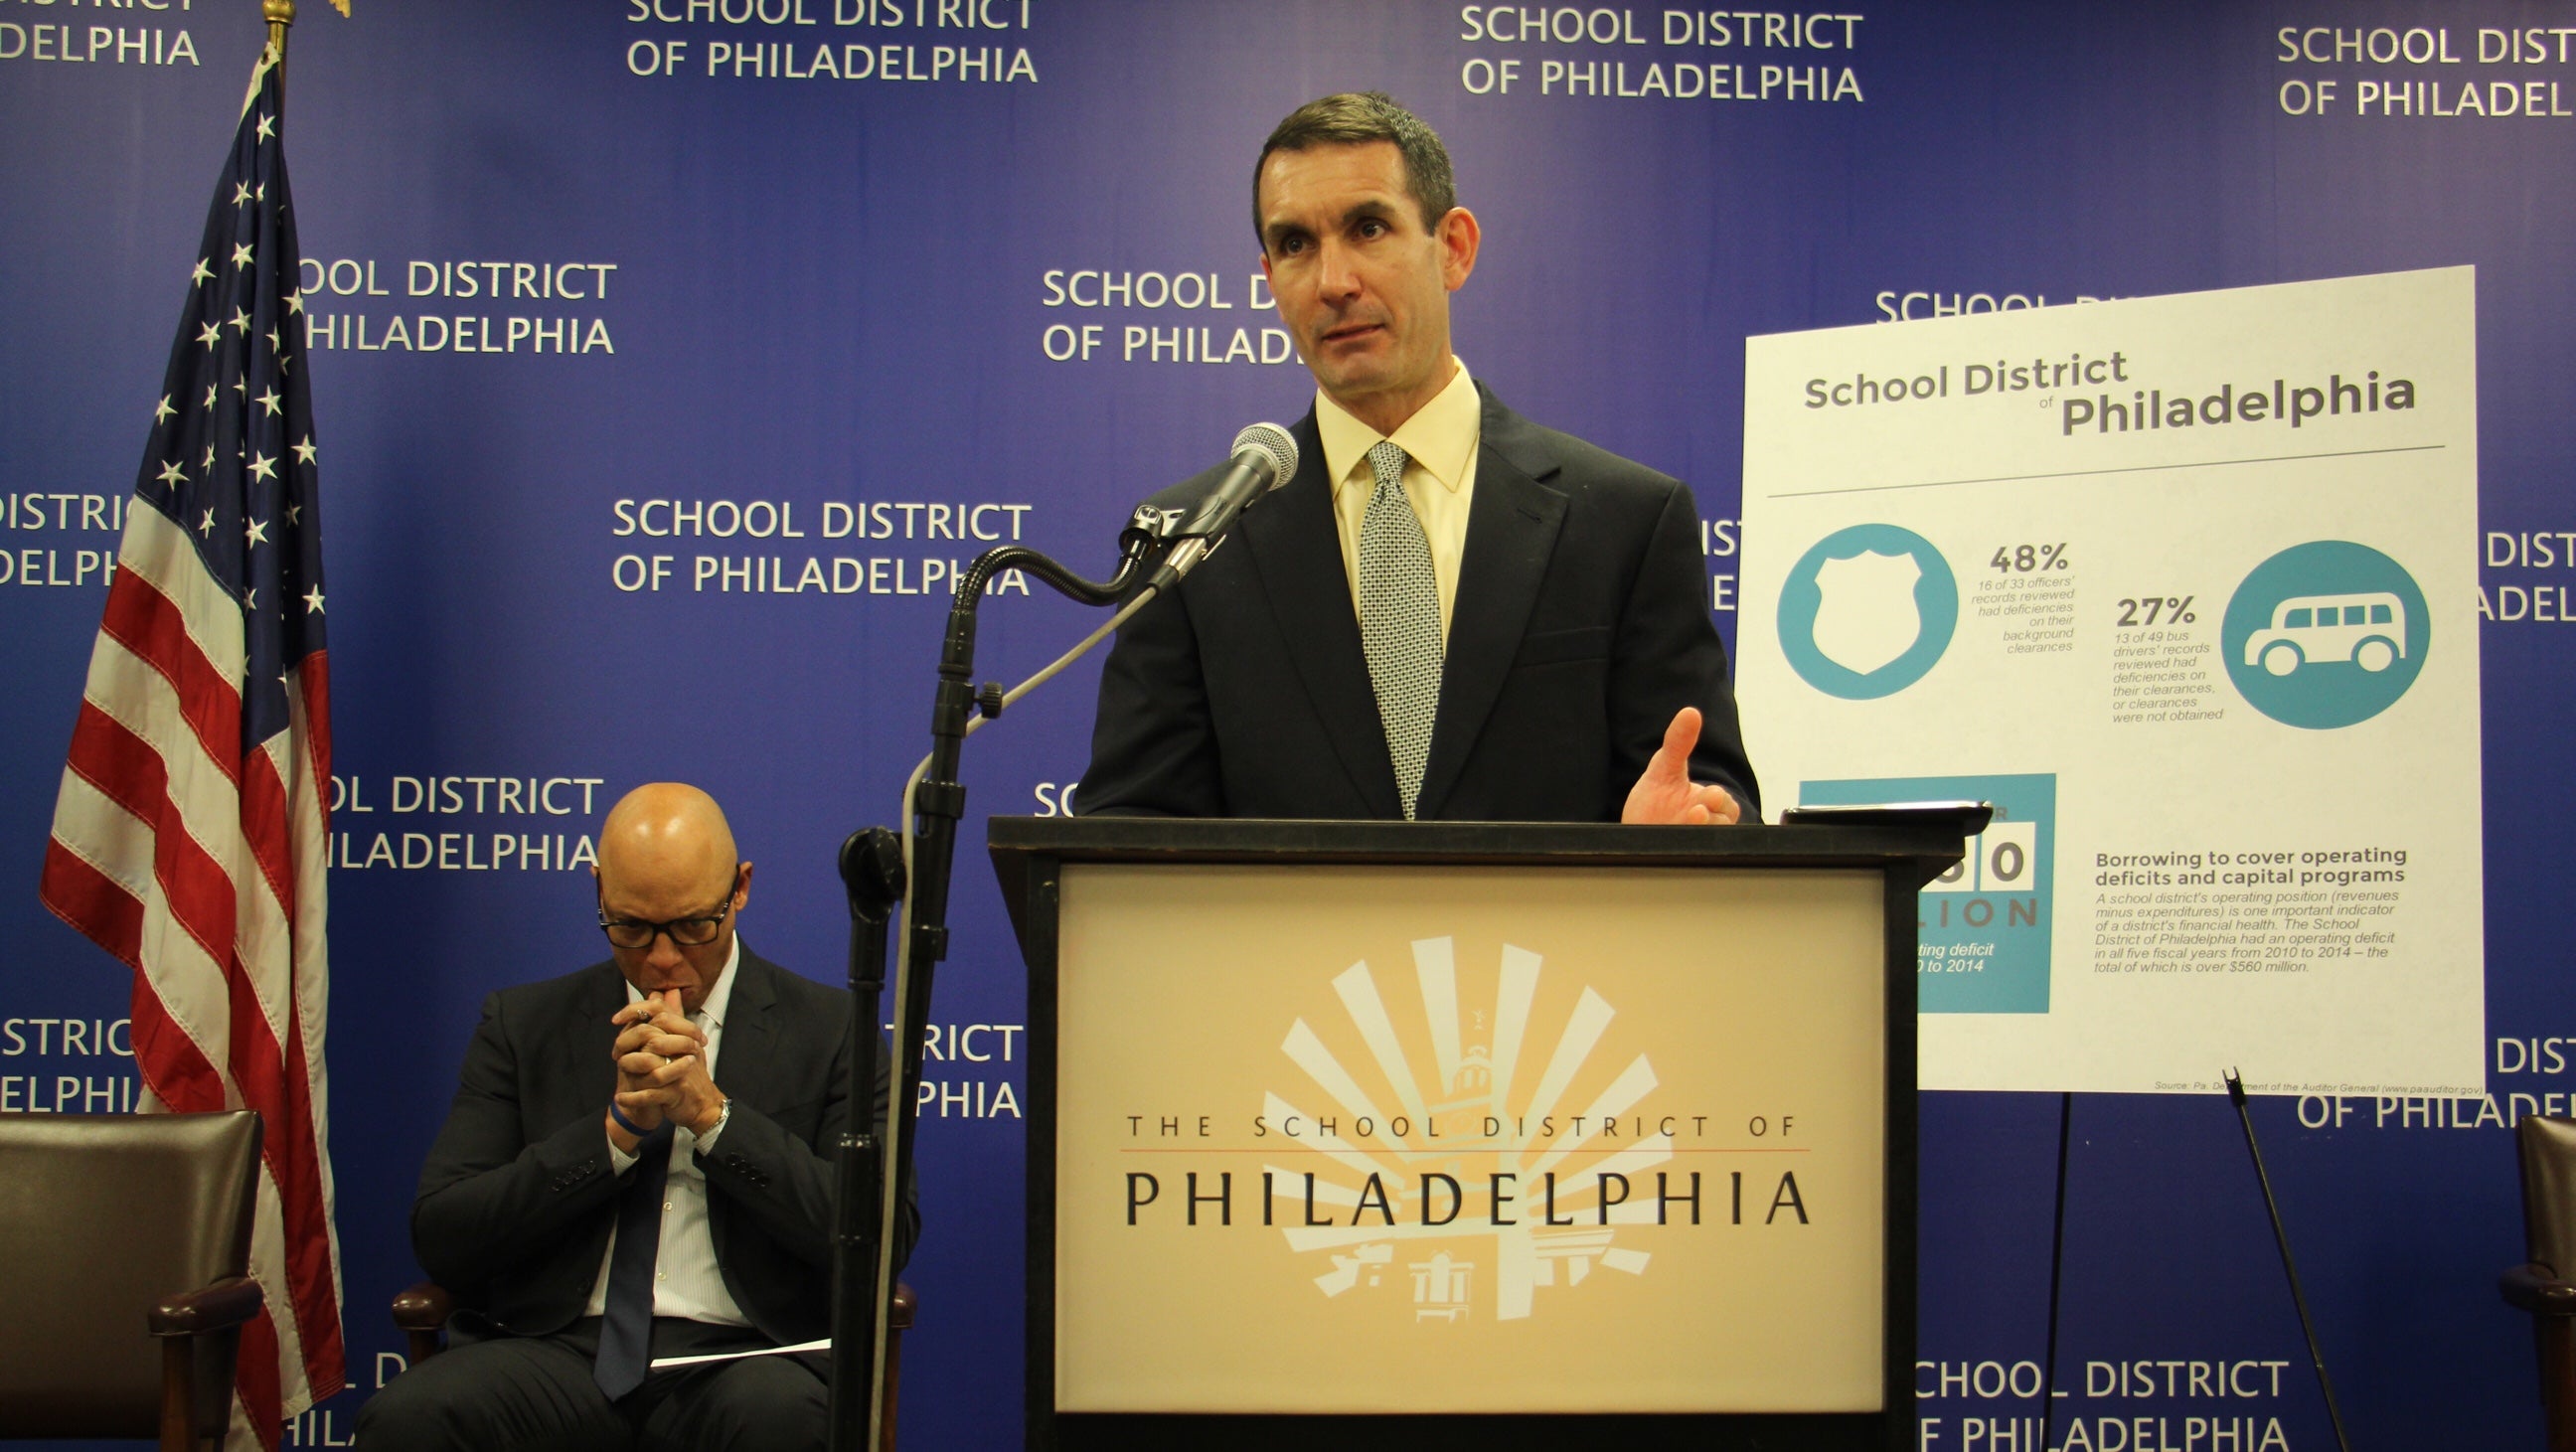 
Pennsylvania Auditor General Eugene DePasquale gives his report on Philadelphia schools during a press conference at the school administration building. (Emma Lee/WHYY)